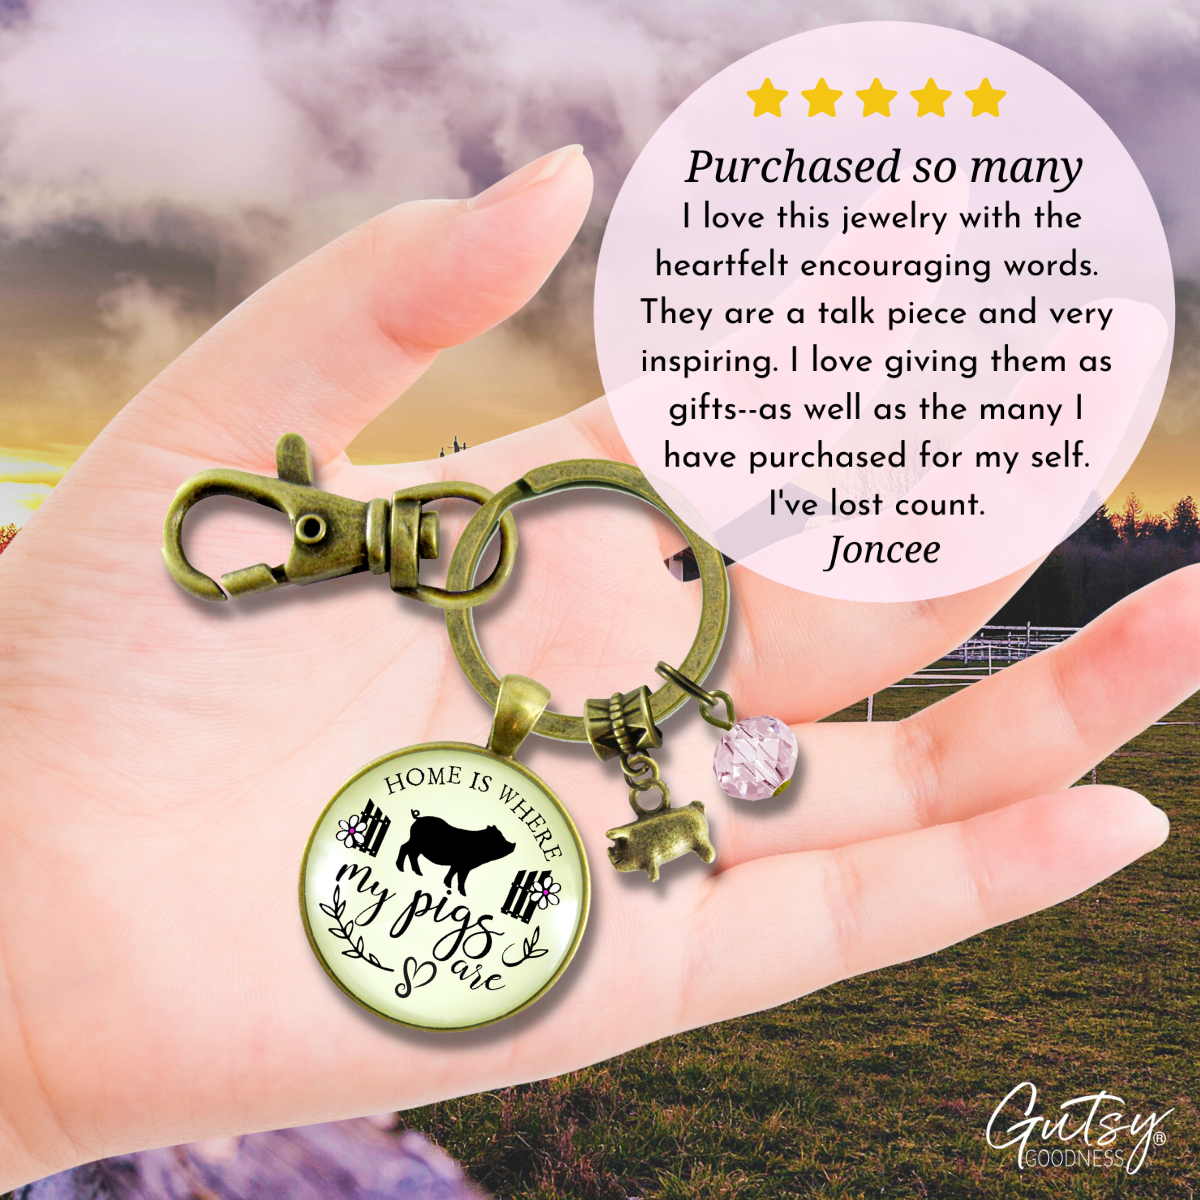 Pig Keychain Home is Where My Pigs Are Farmer Girl Inspired Jewelry - Gutsy Goodness Handmade Jewelry;Pig Keychain Home Is Where My Pigs Are Farmer Girl Inspired Jewelry - Gutsy Goodness Handmade Jewelry Gifts